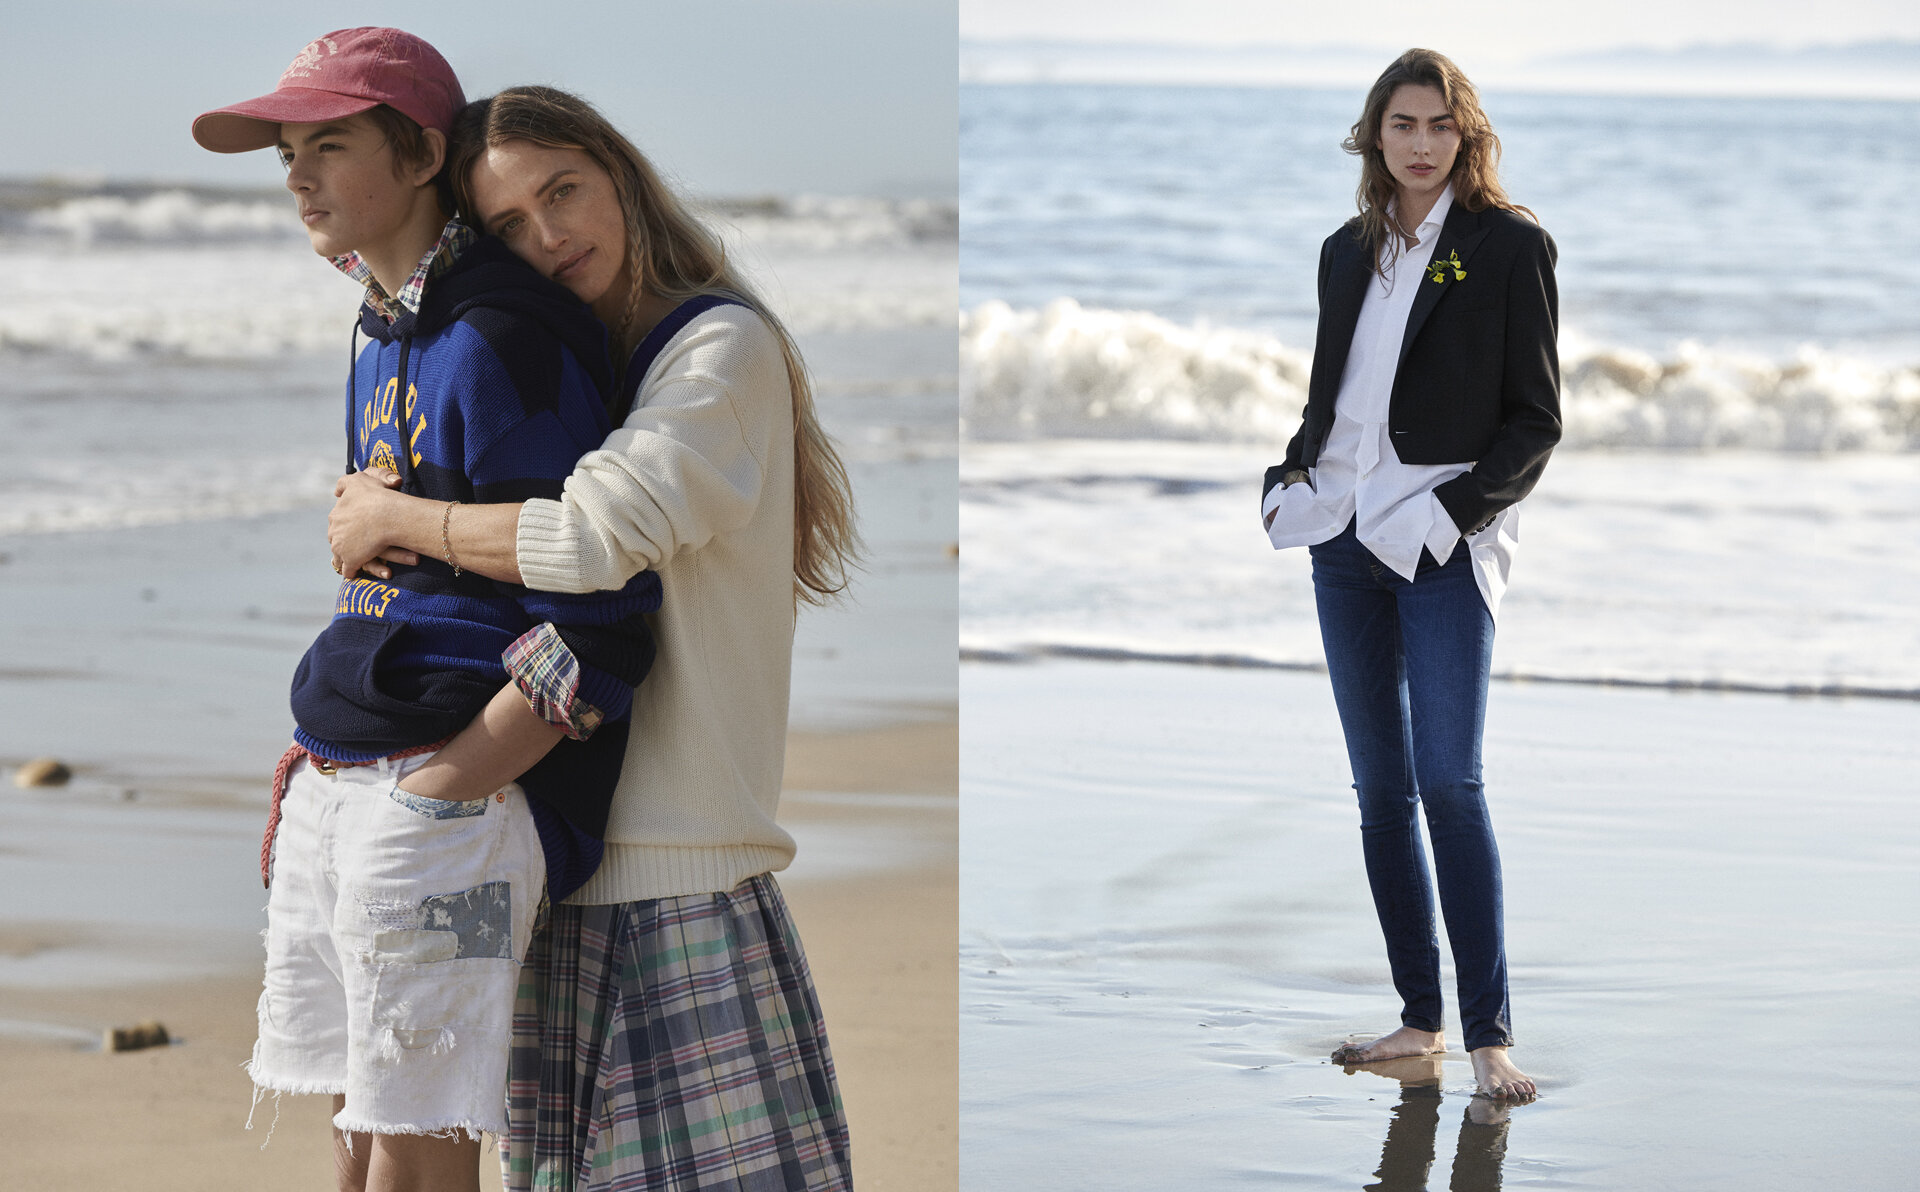 Family is Who You Love: Spring 2019 (Polo Ralph Lauren)